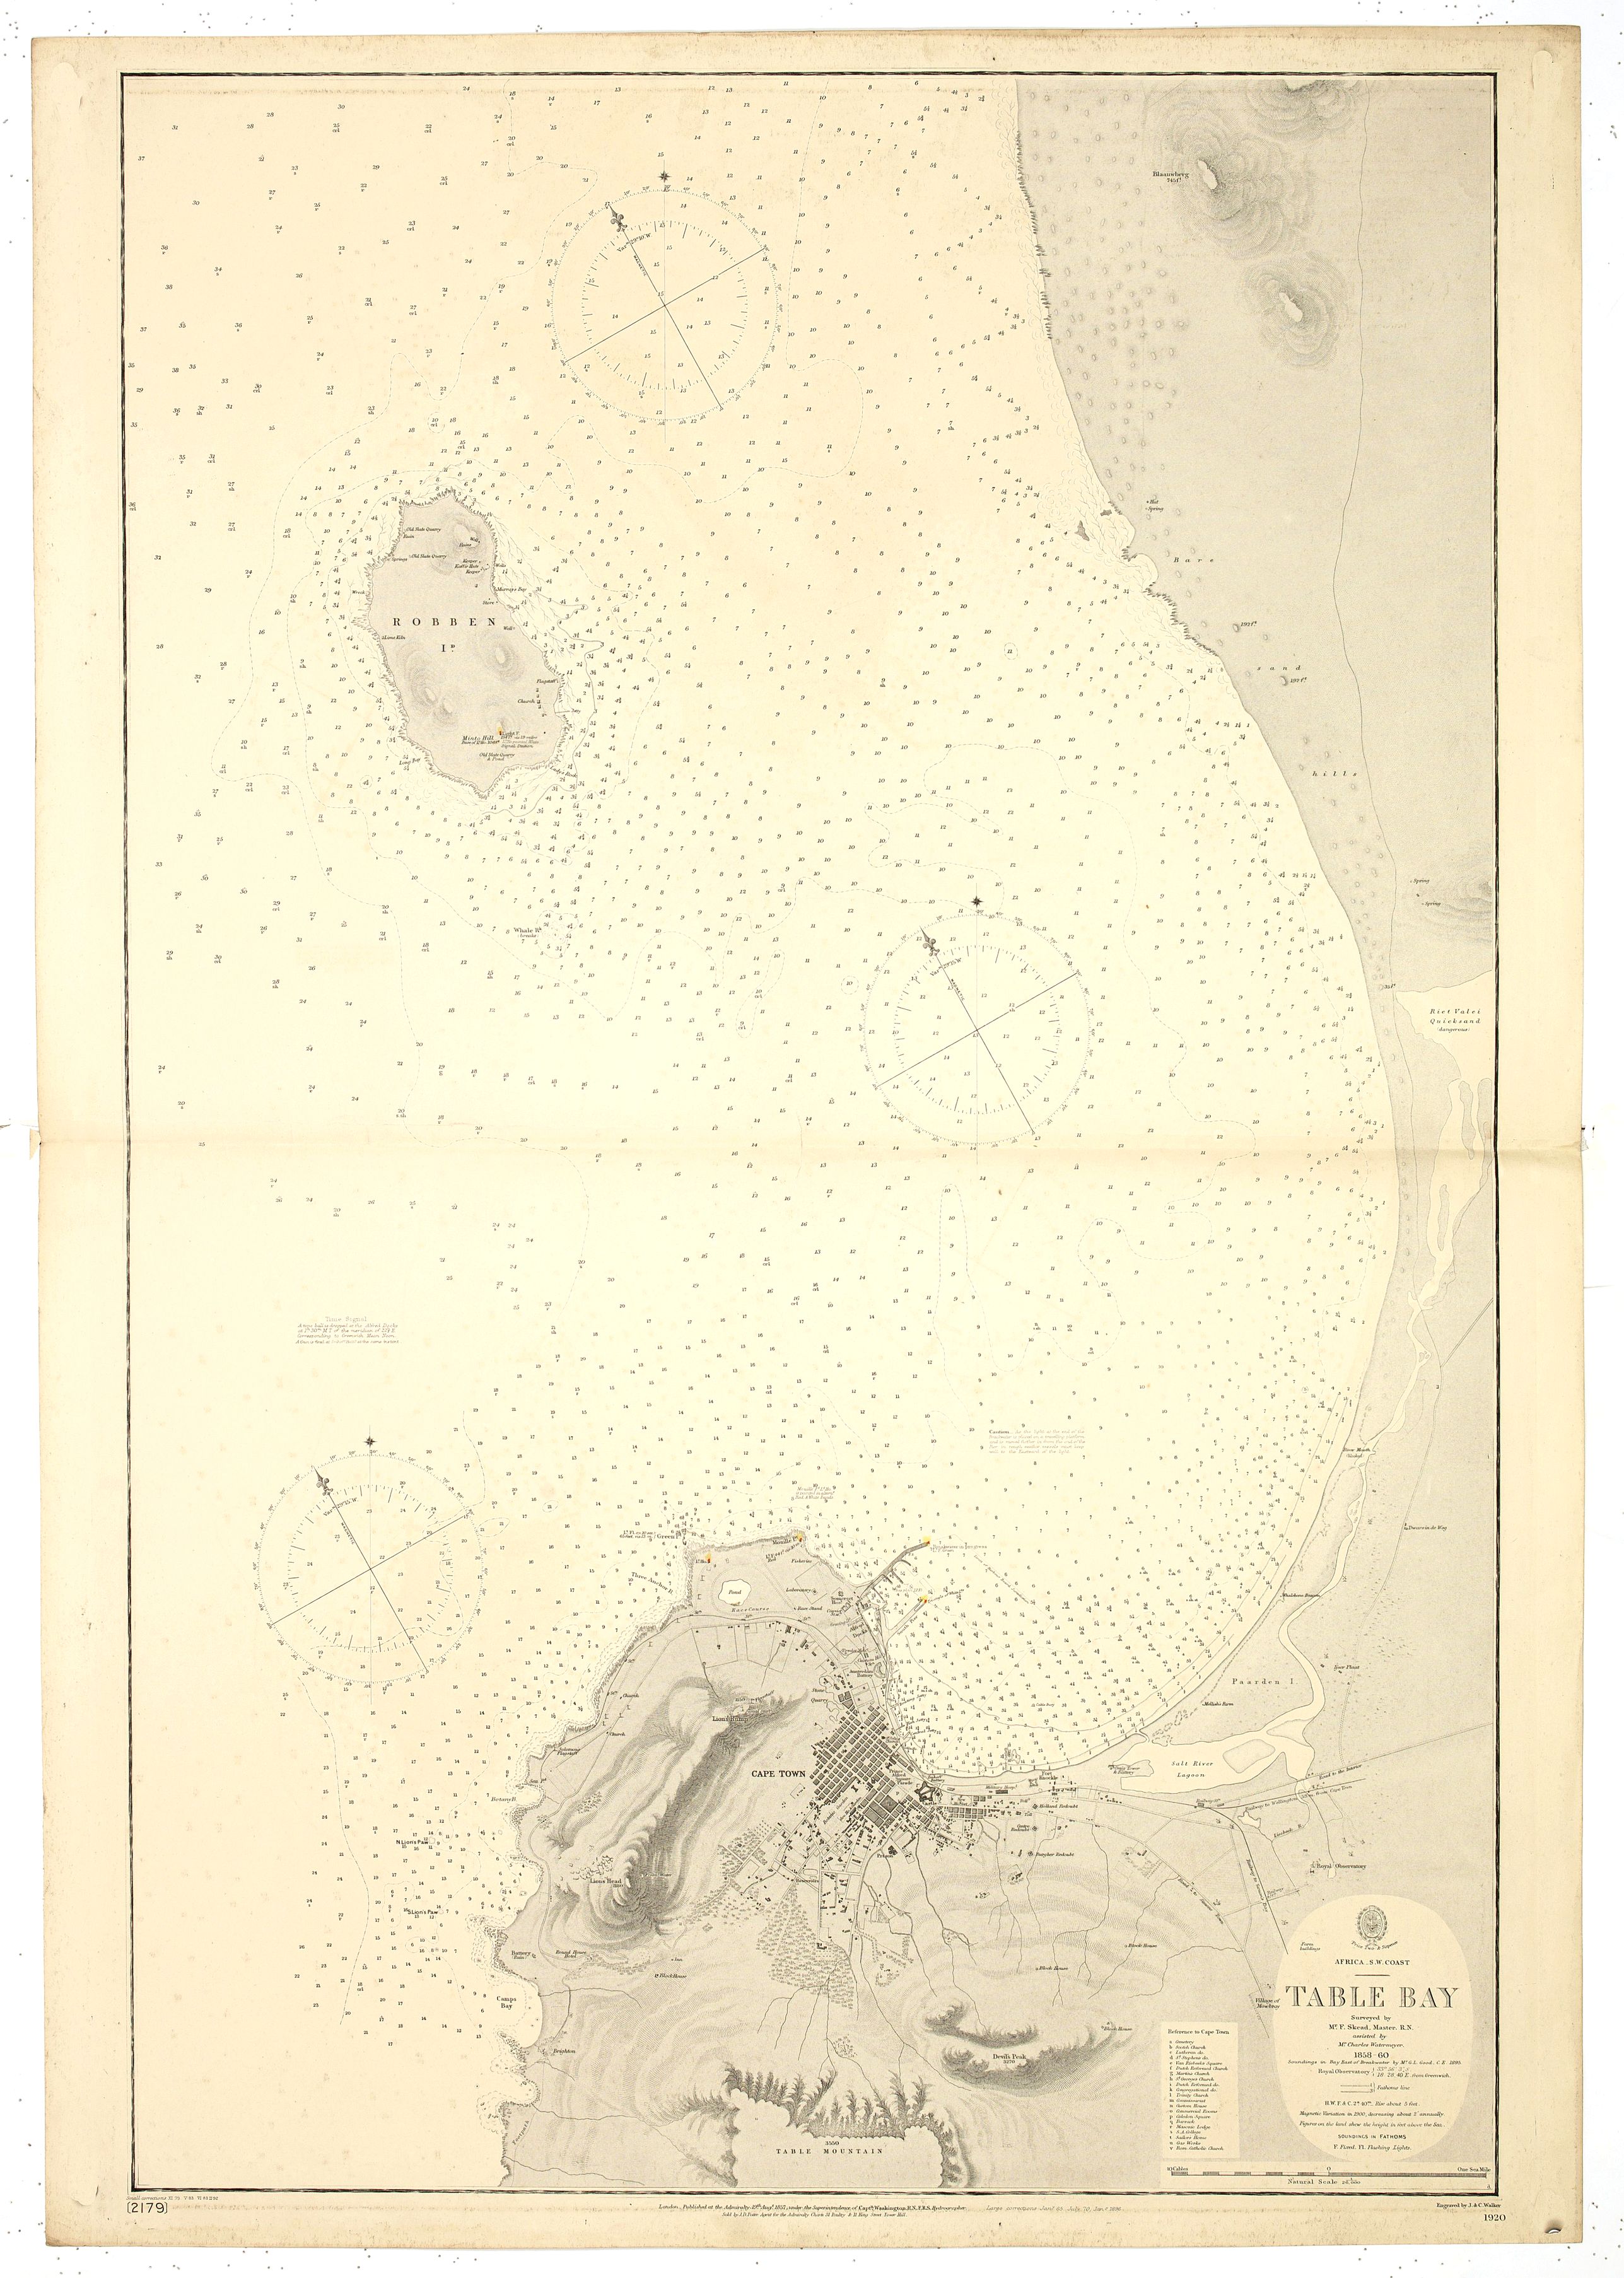 Africa - SW coast Table Bay surveyed by Mr F Skead Master RN assisted by Mr Charles Watermeyer 1858-60